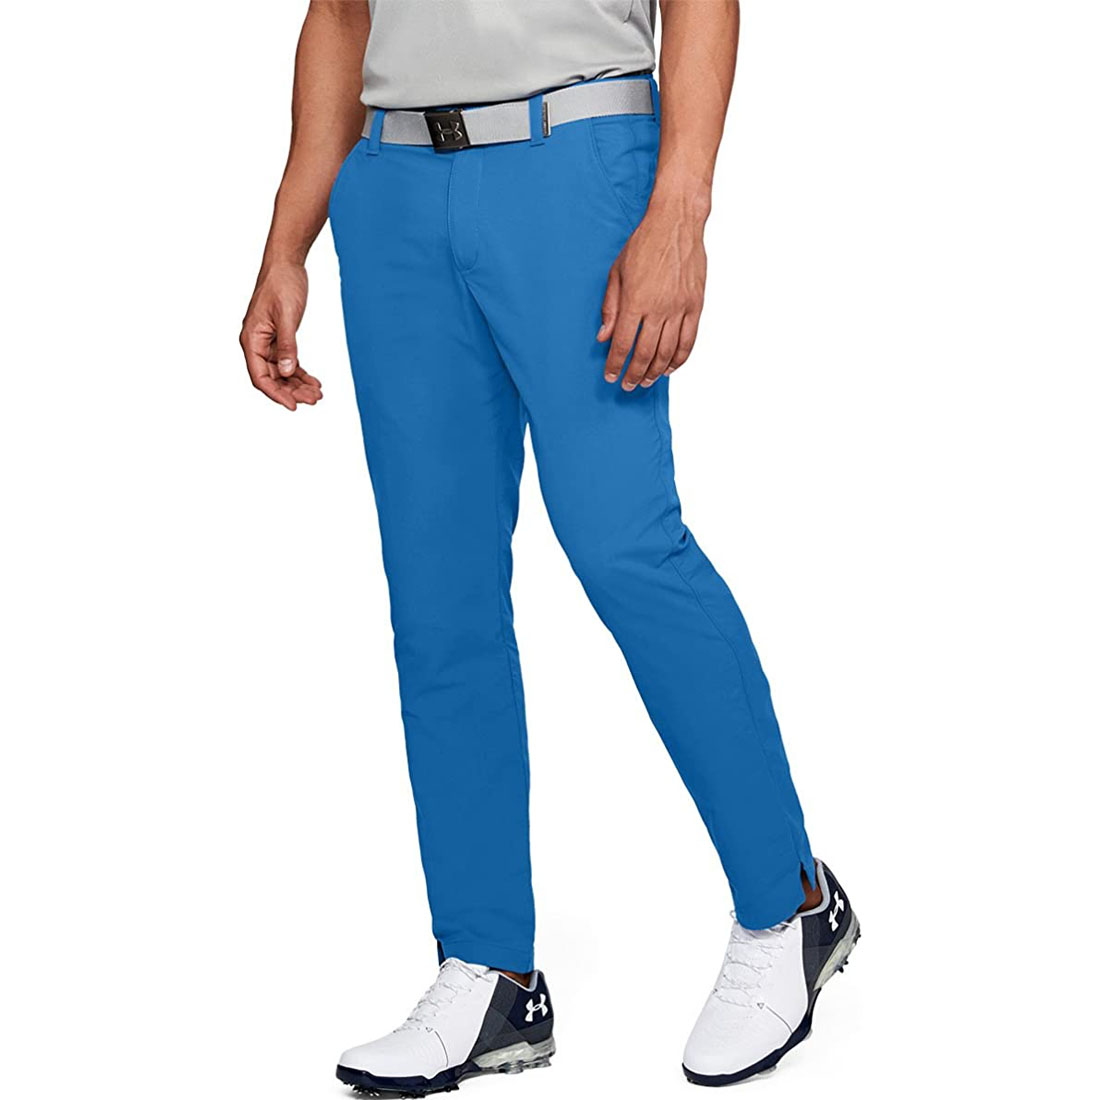 Ian Poulter Design IJP Mens Golf Trousers Kingfisher Teal - Sizes 28 - -  Just Golf Online